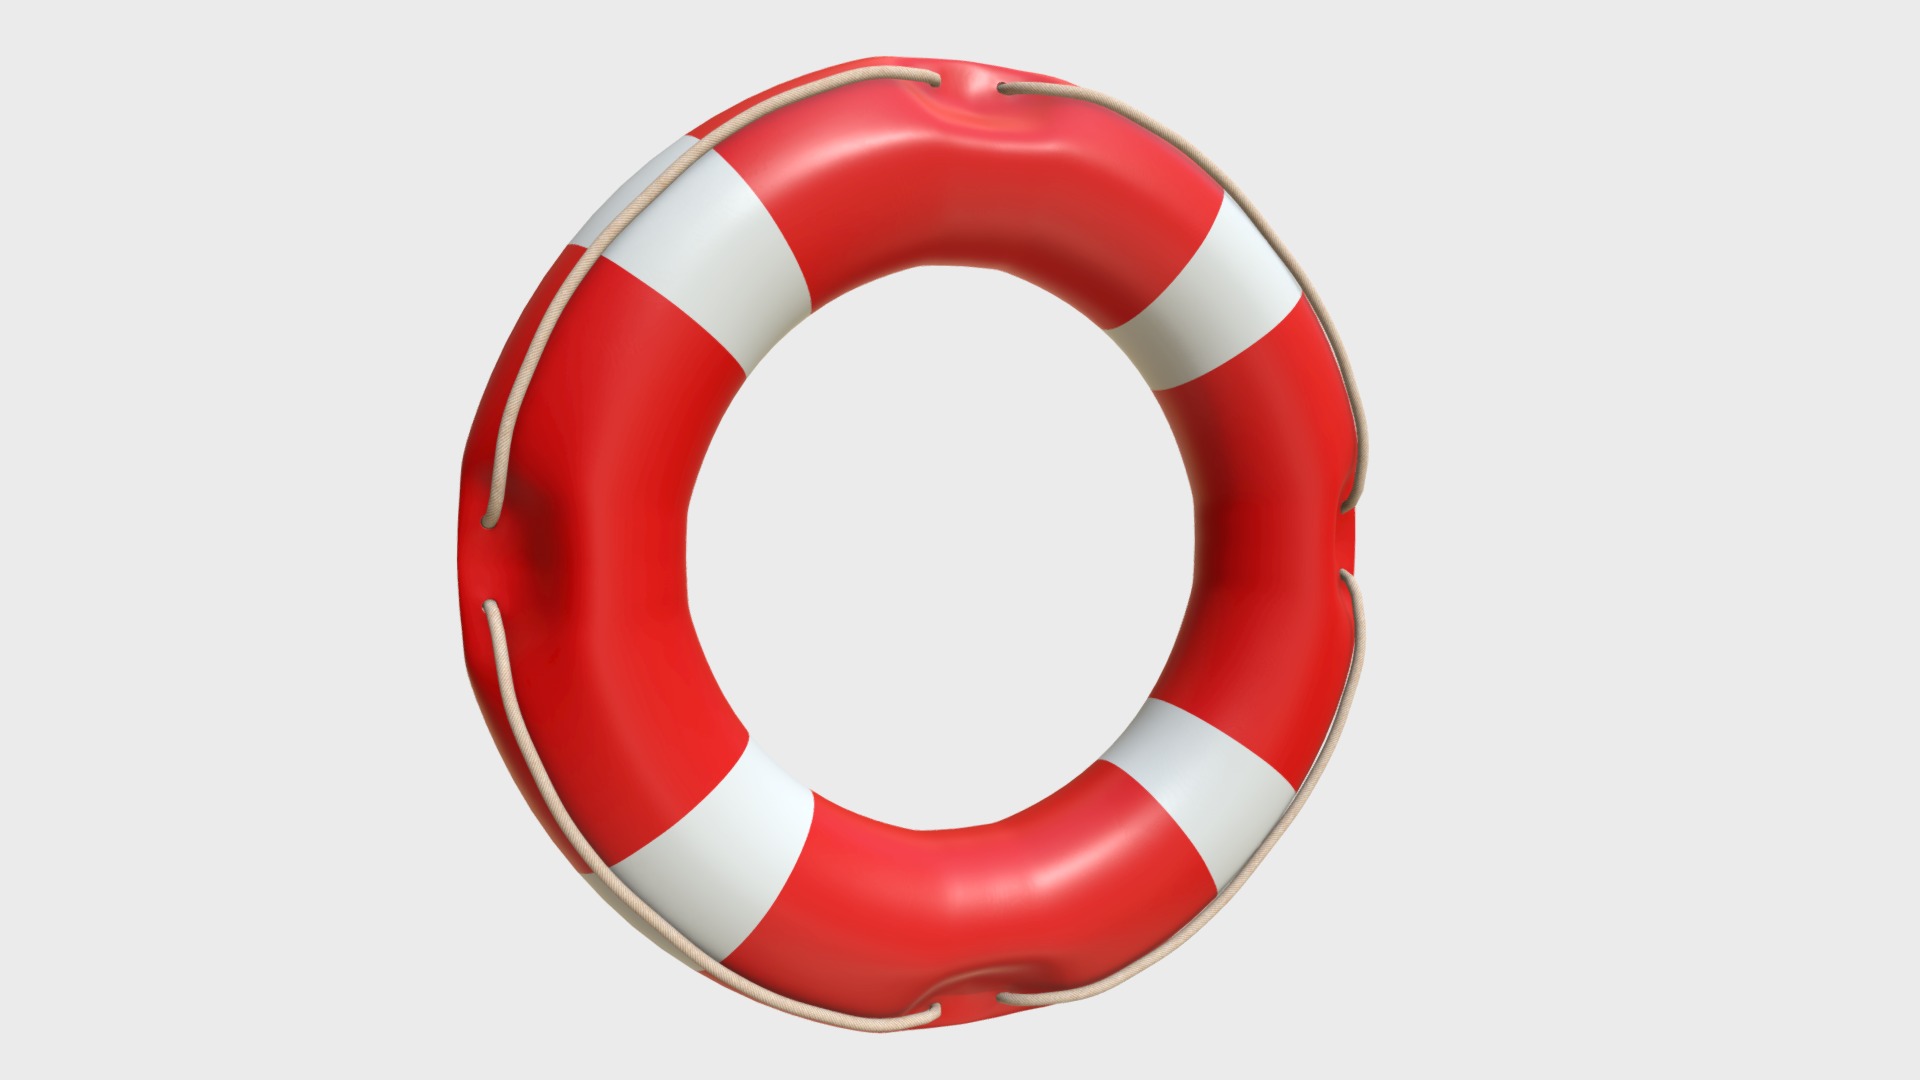 3D model Lifebuoy - This is a 3D model of the Lifebuoy. The 3D model is about a red and white circular object.